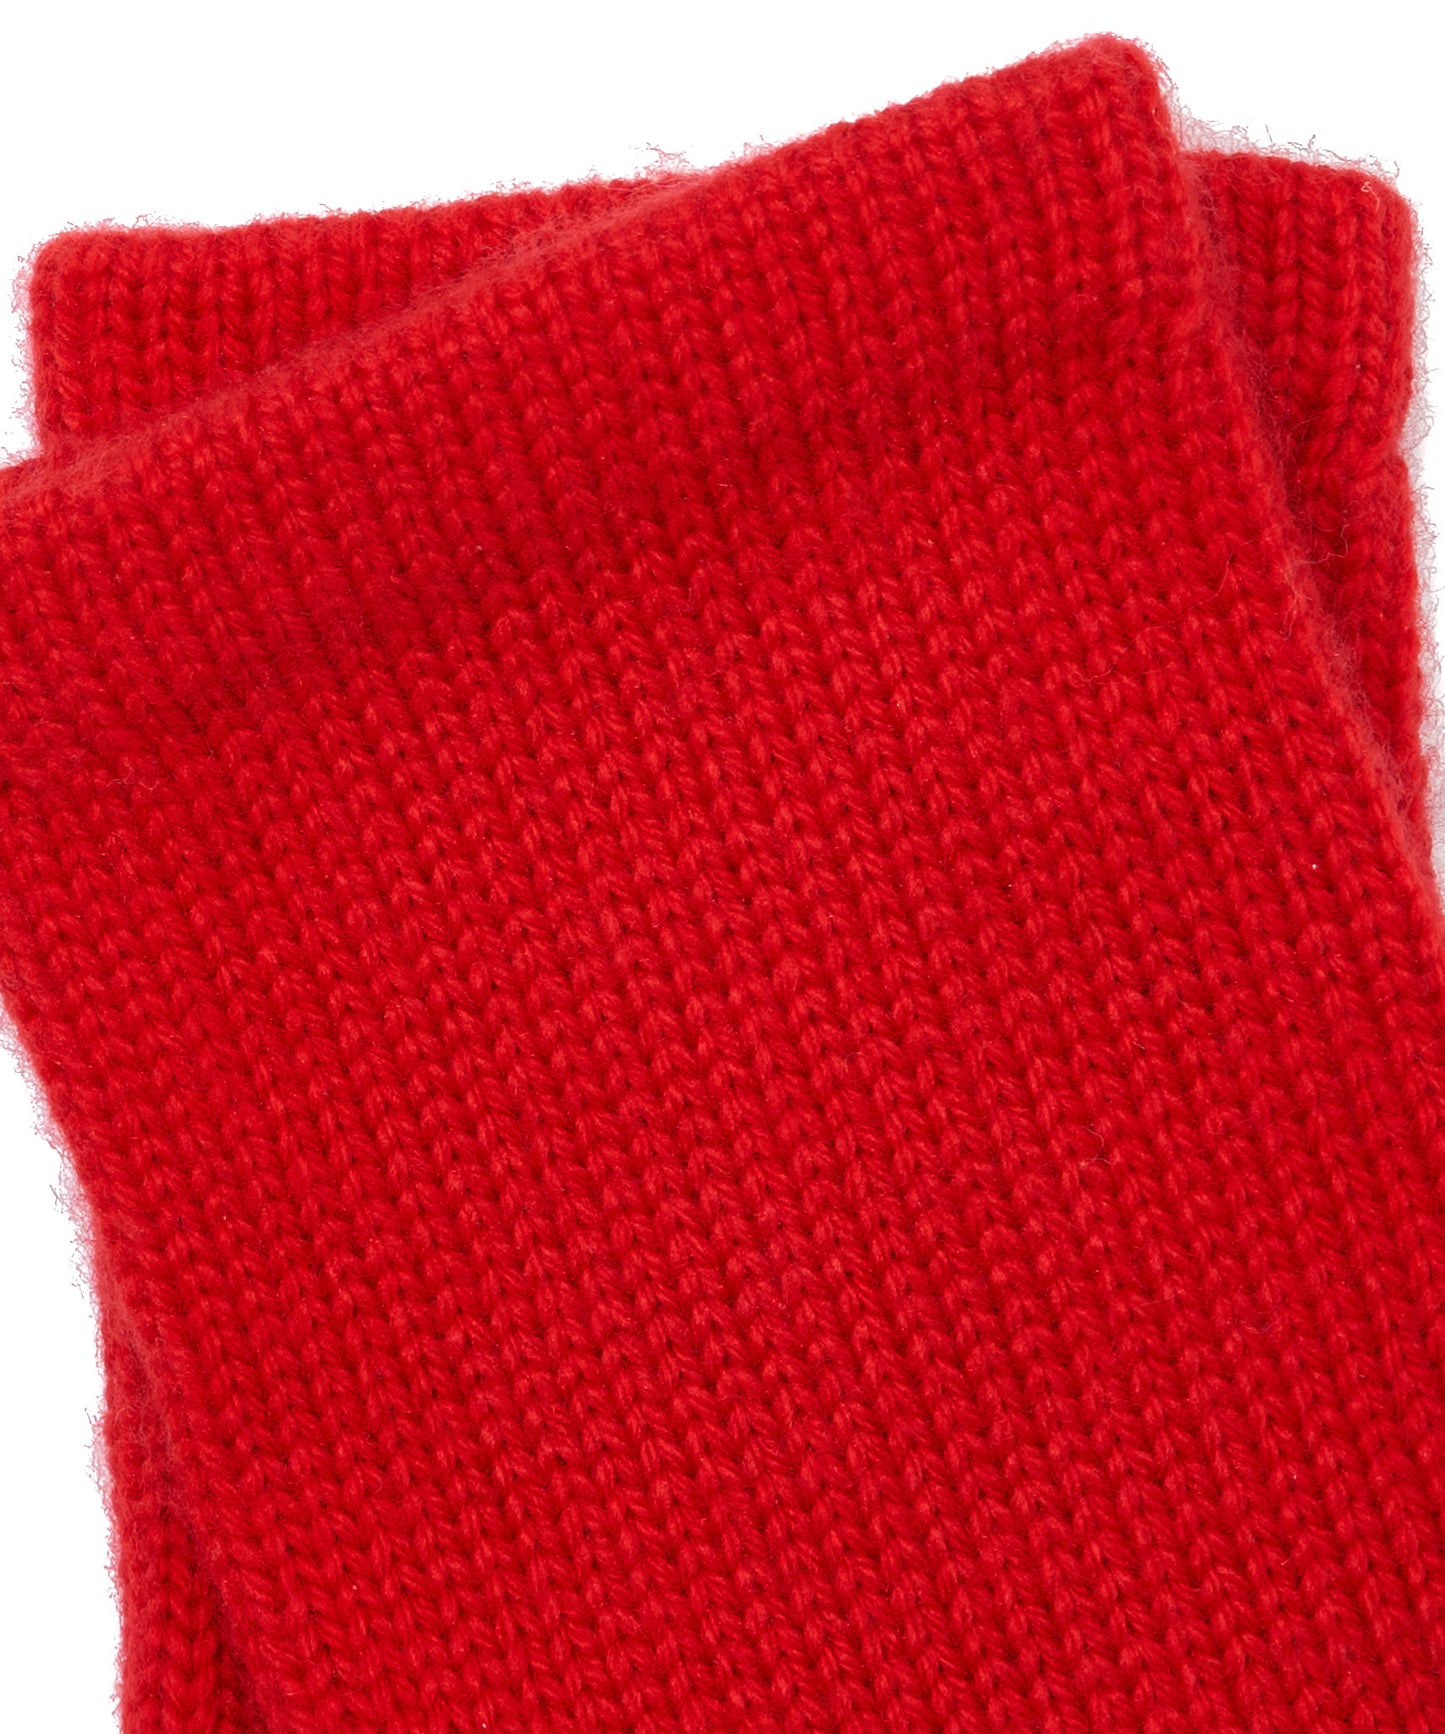 Echo Touch Glove in color Red